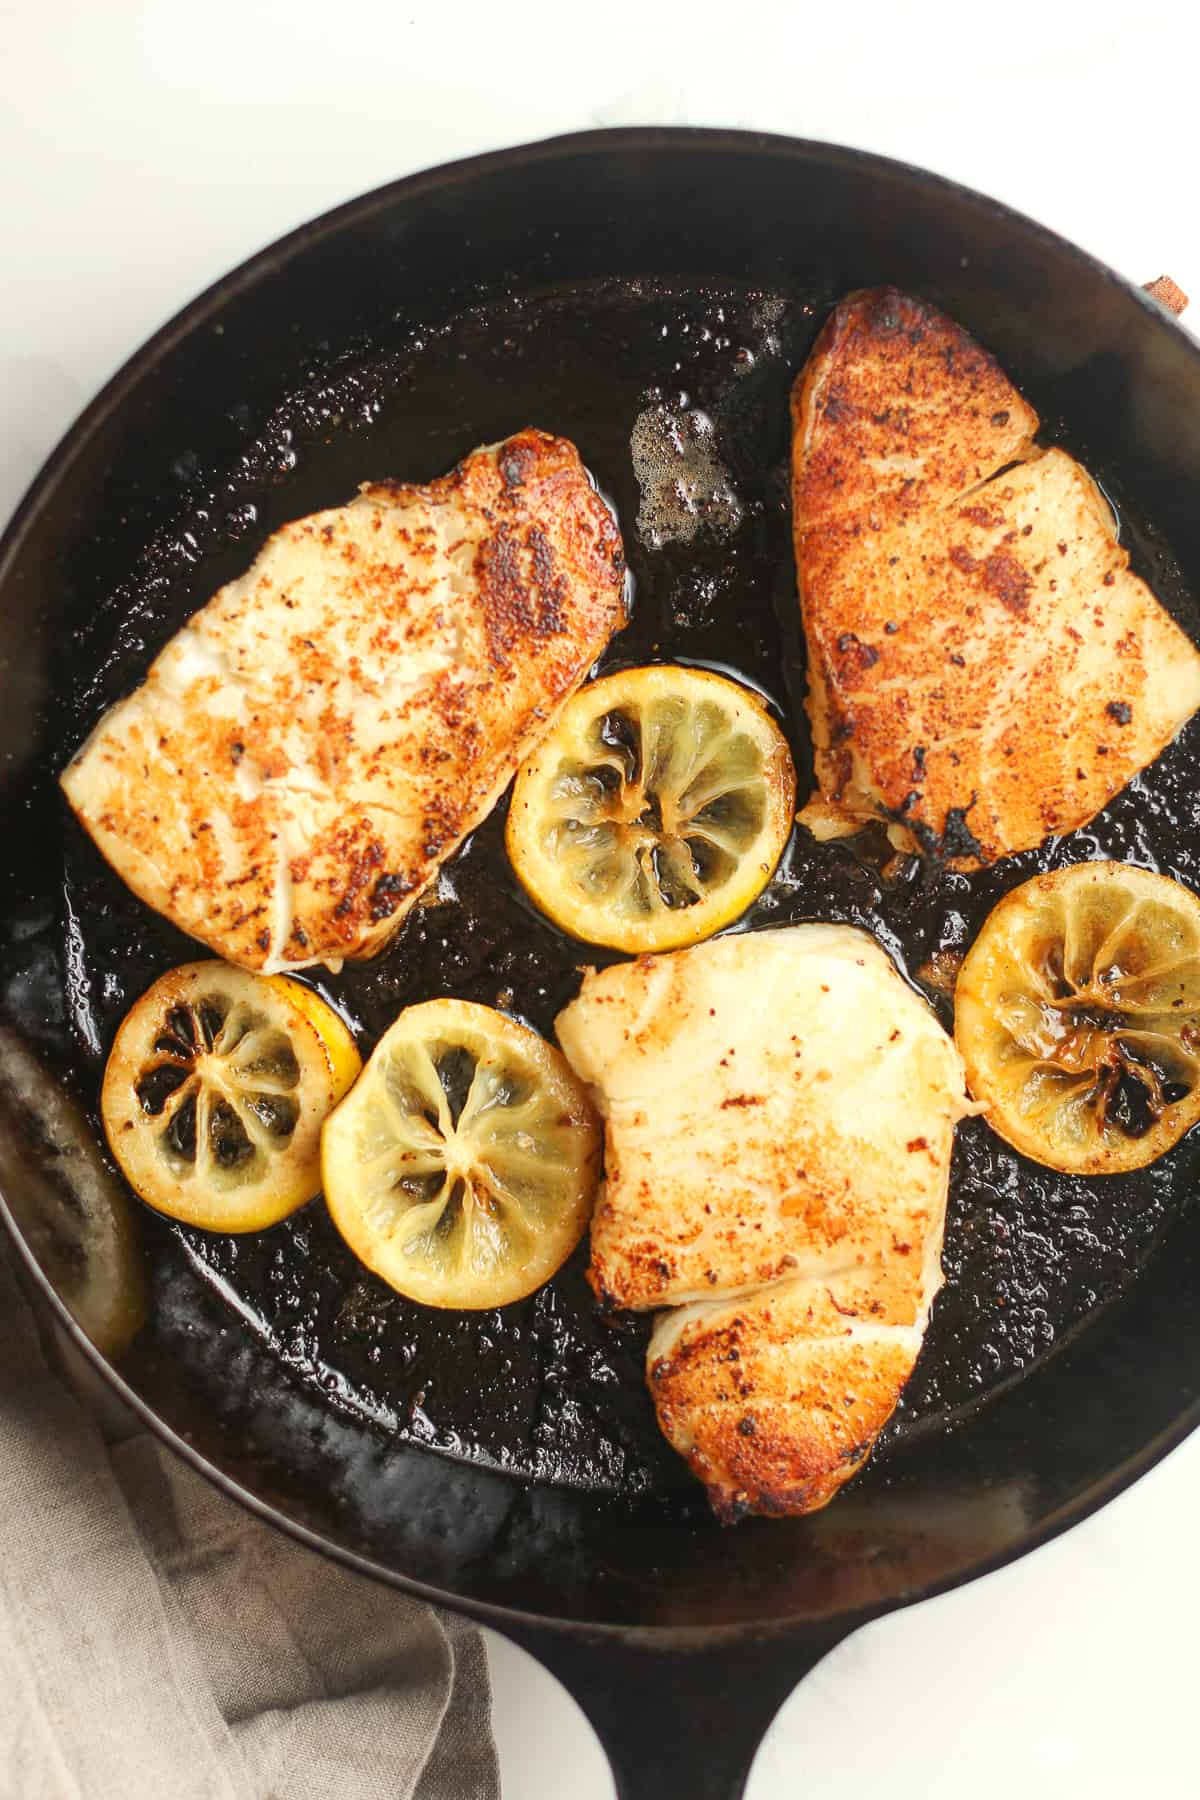 A cast iron skillet after pan searing the sea bass, with lemon slices.